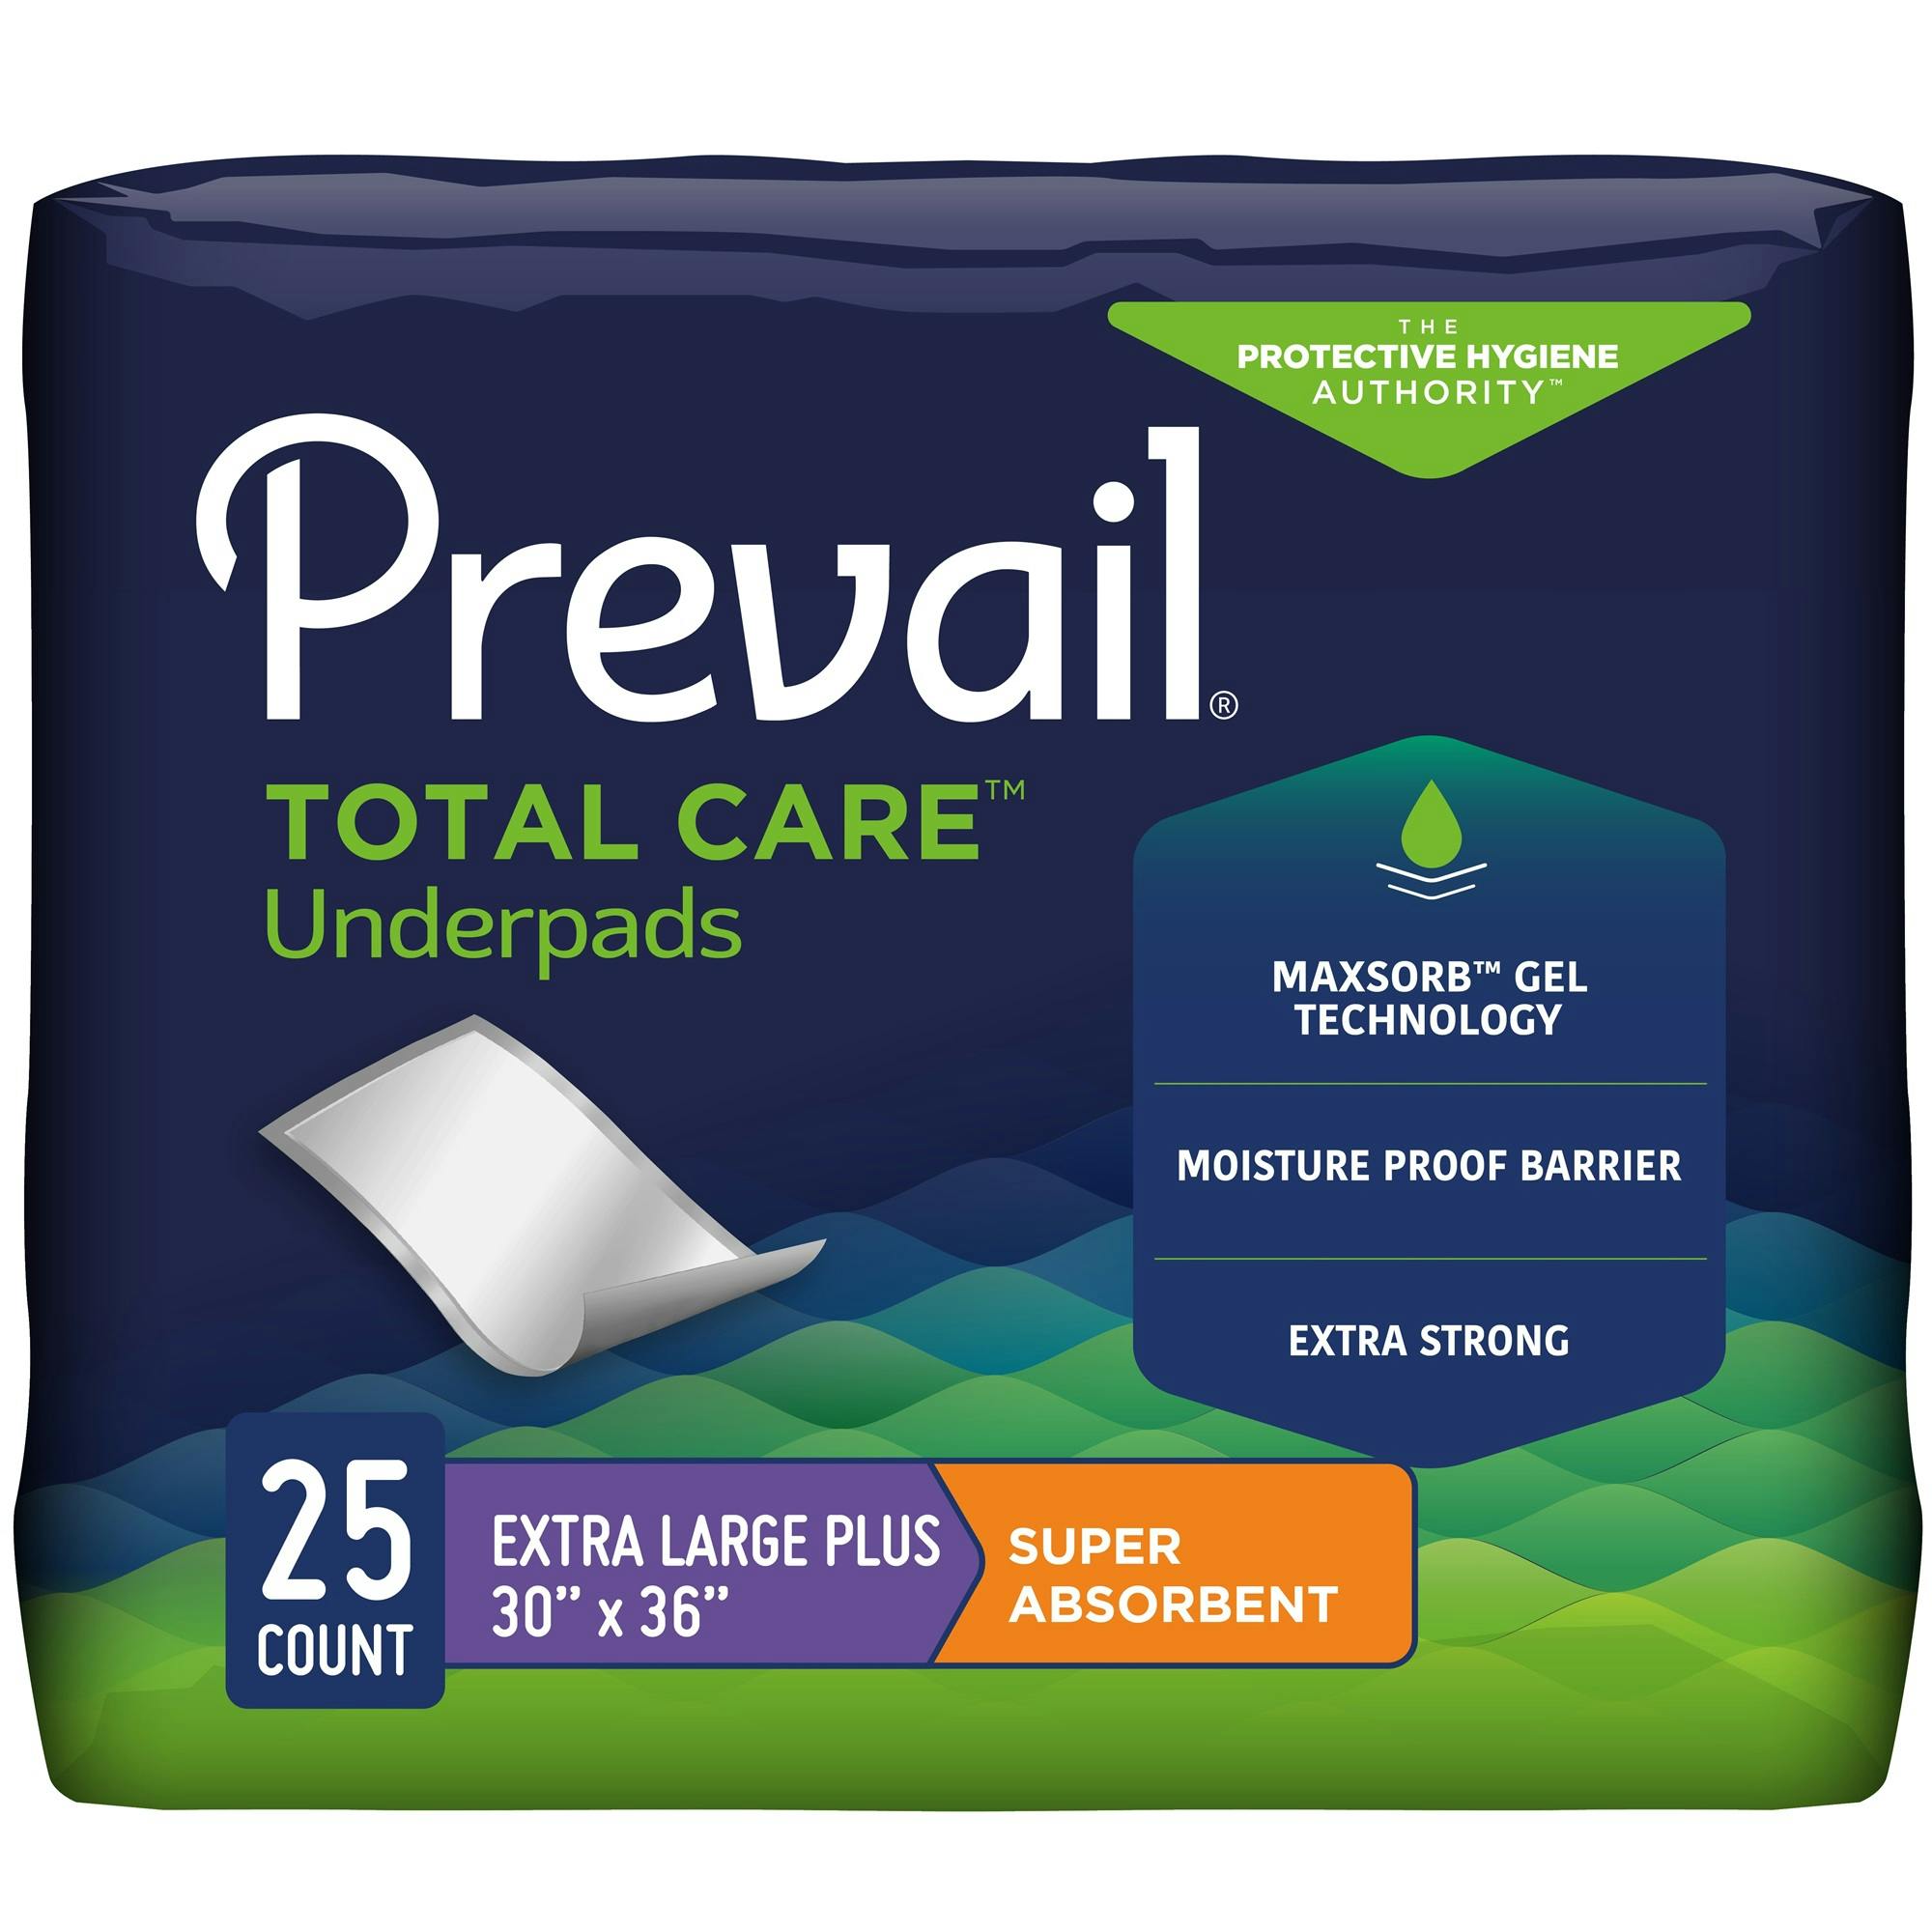 Prevail Underpad 30 x 36 Inches, Heavy